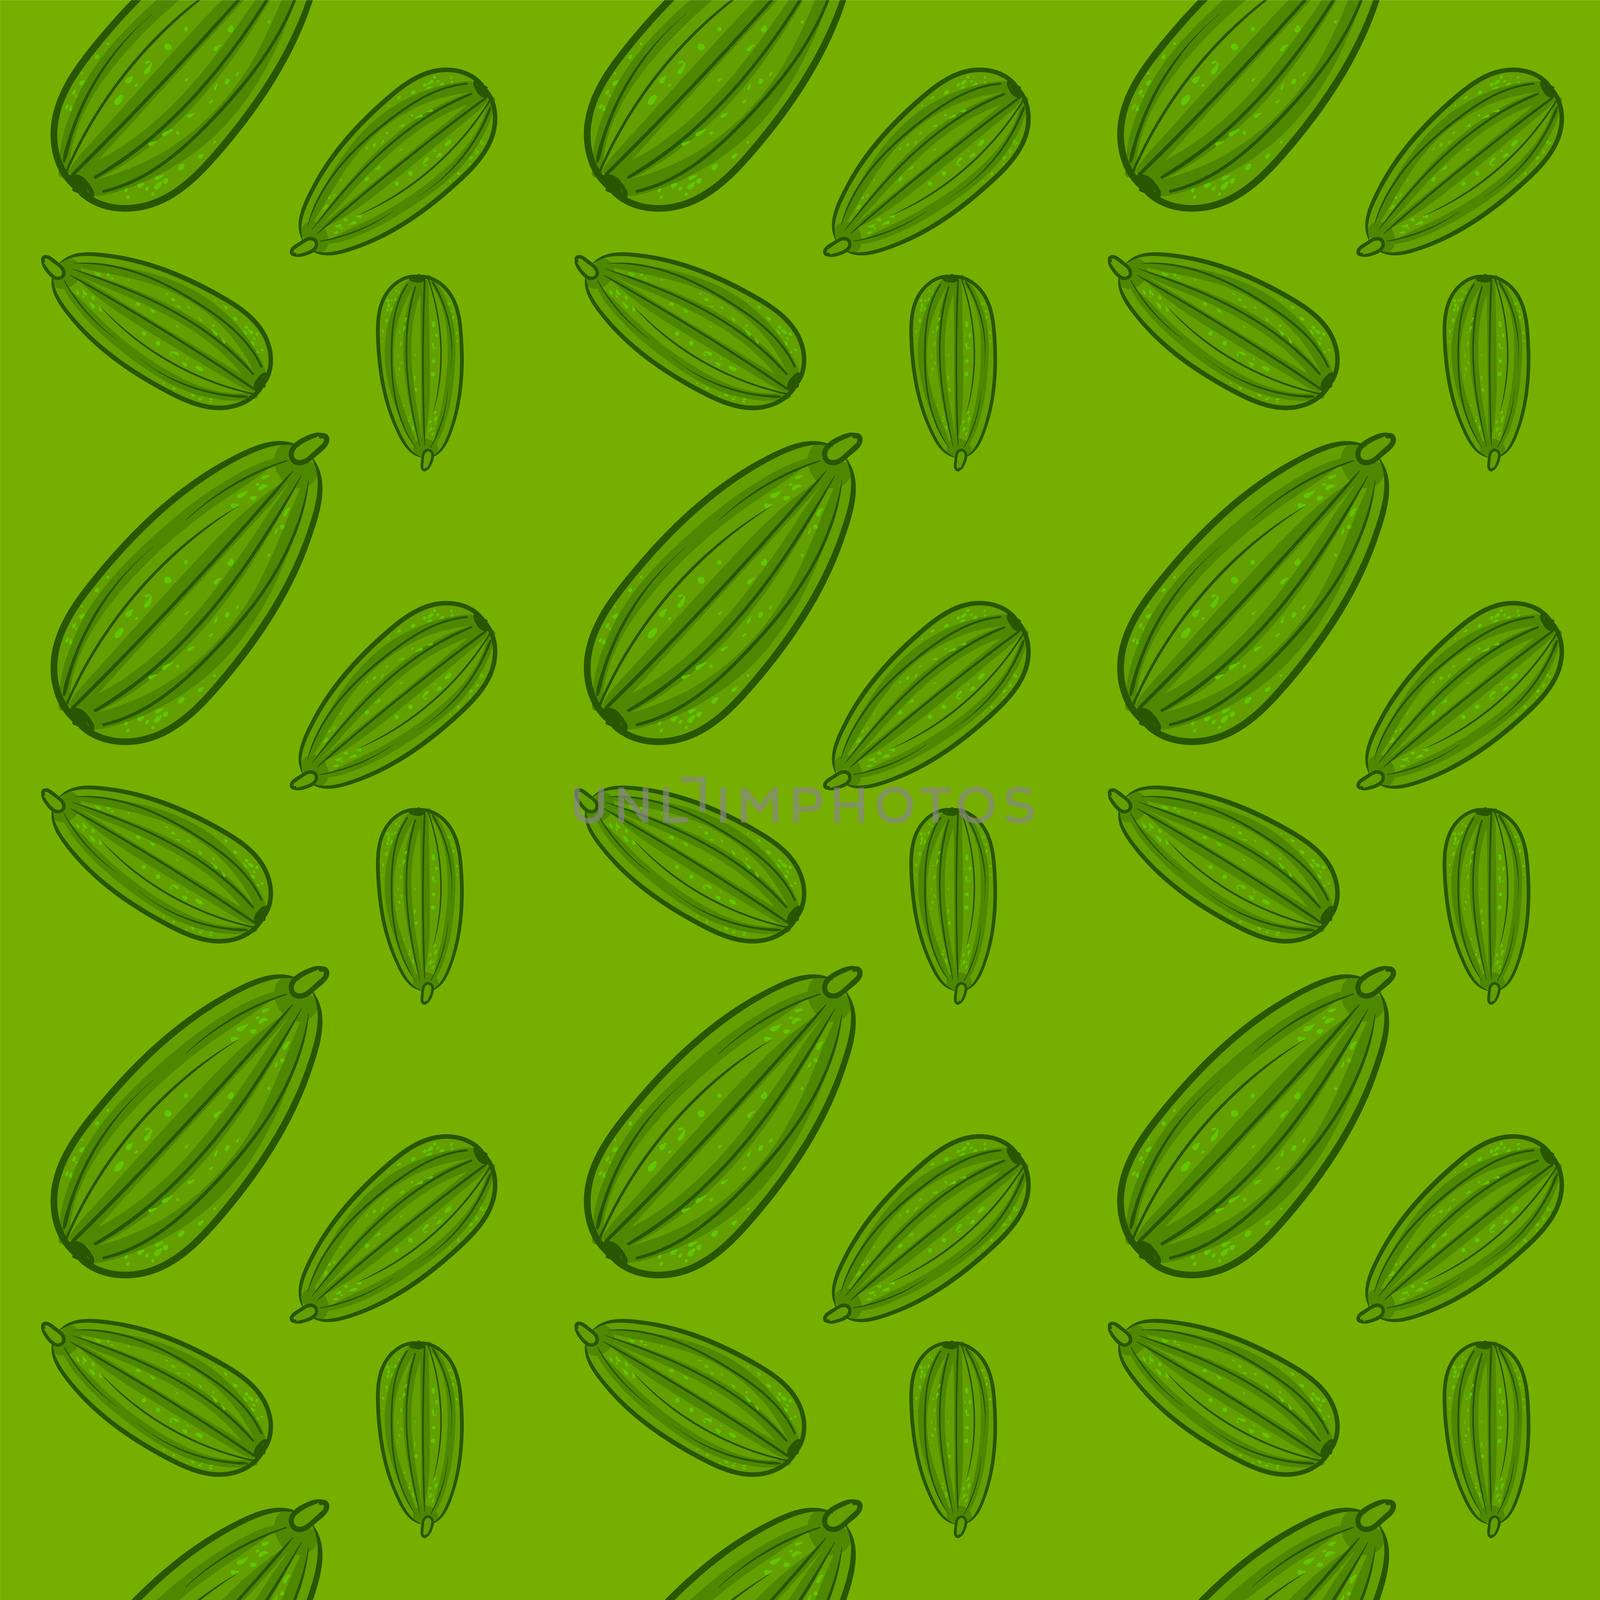 Cucumbers pattern , illustration, vector on white background